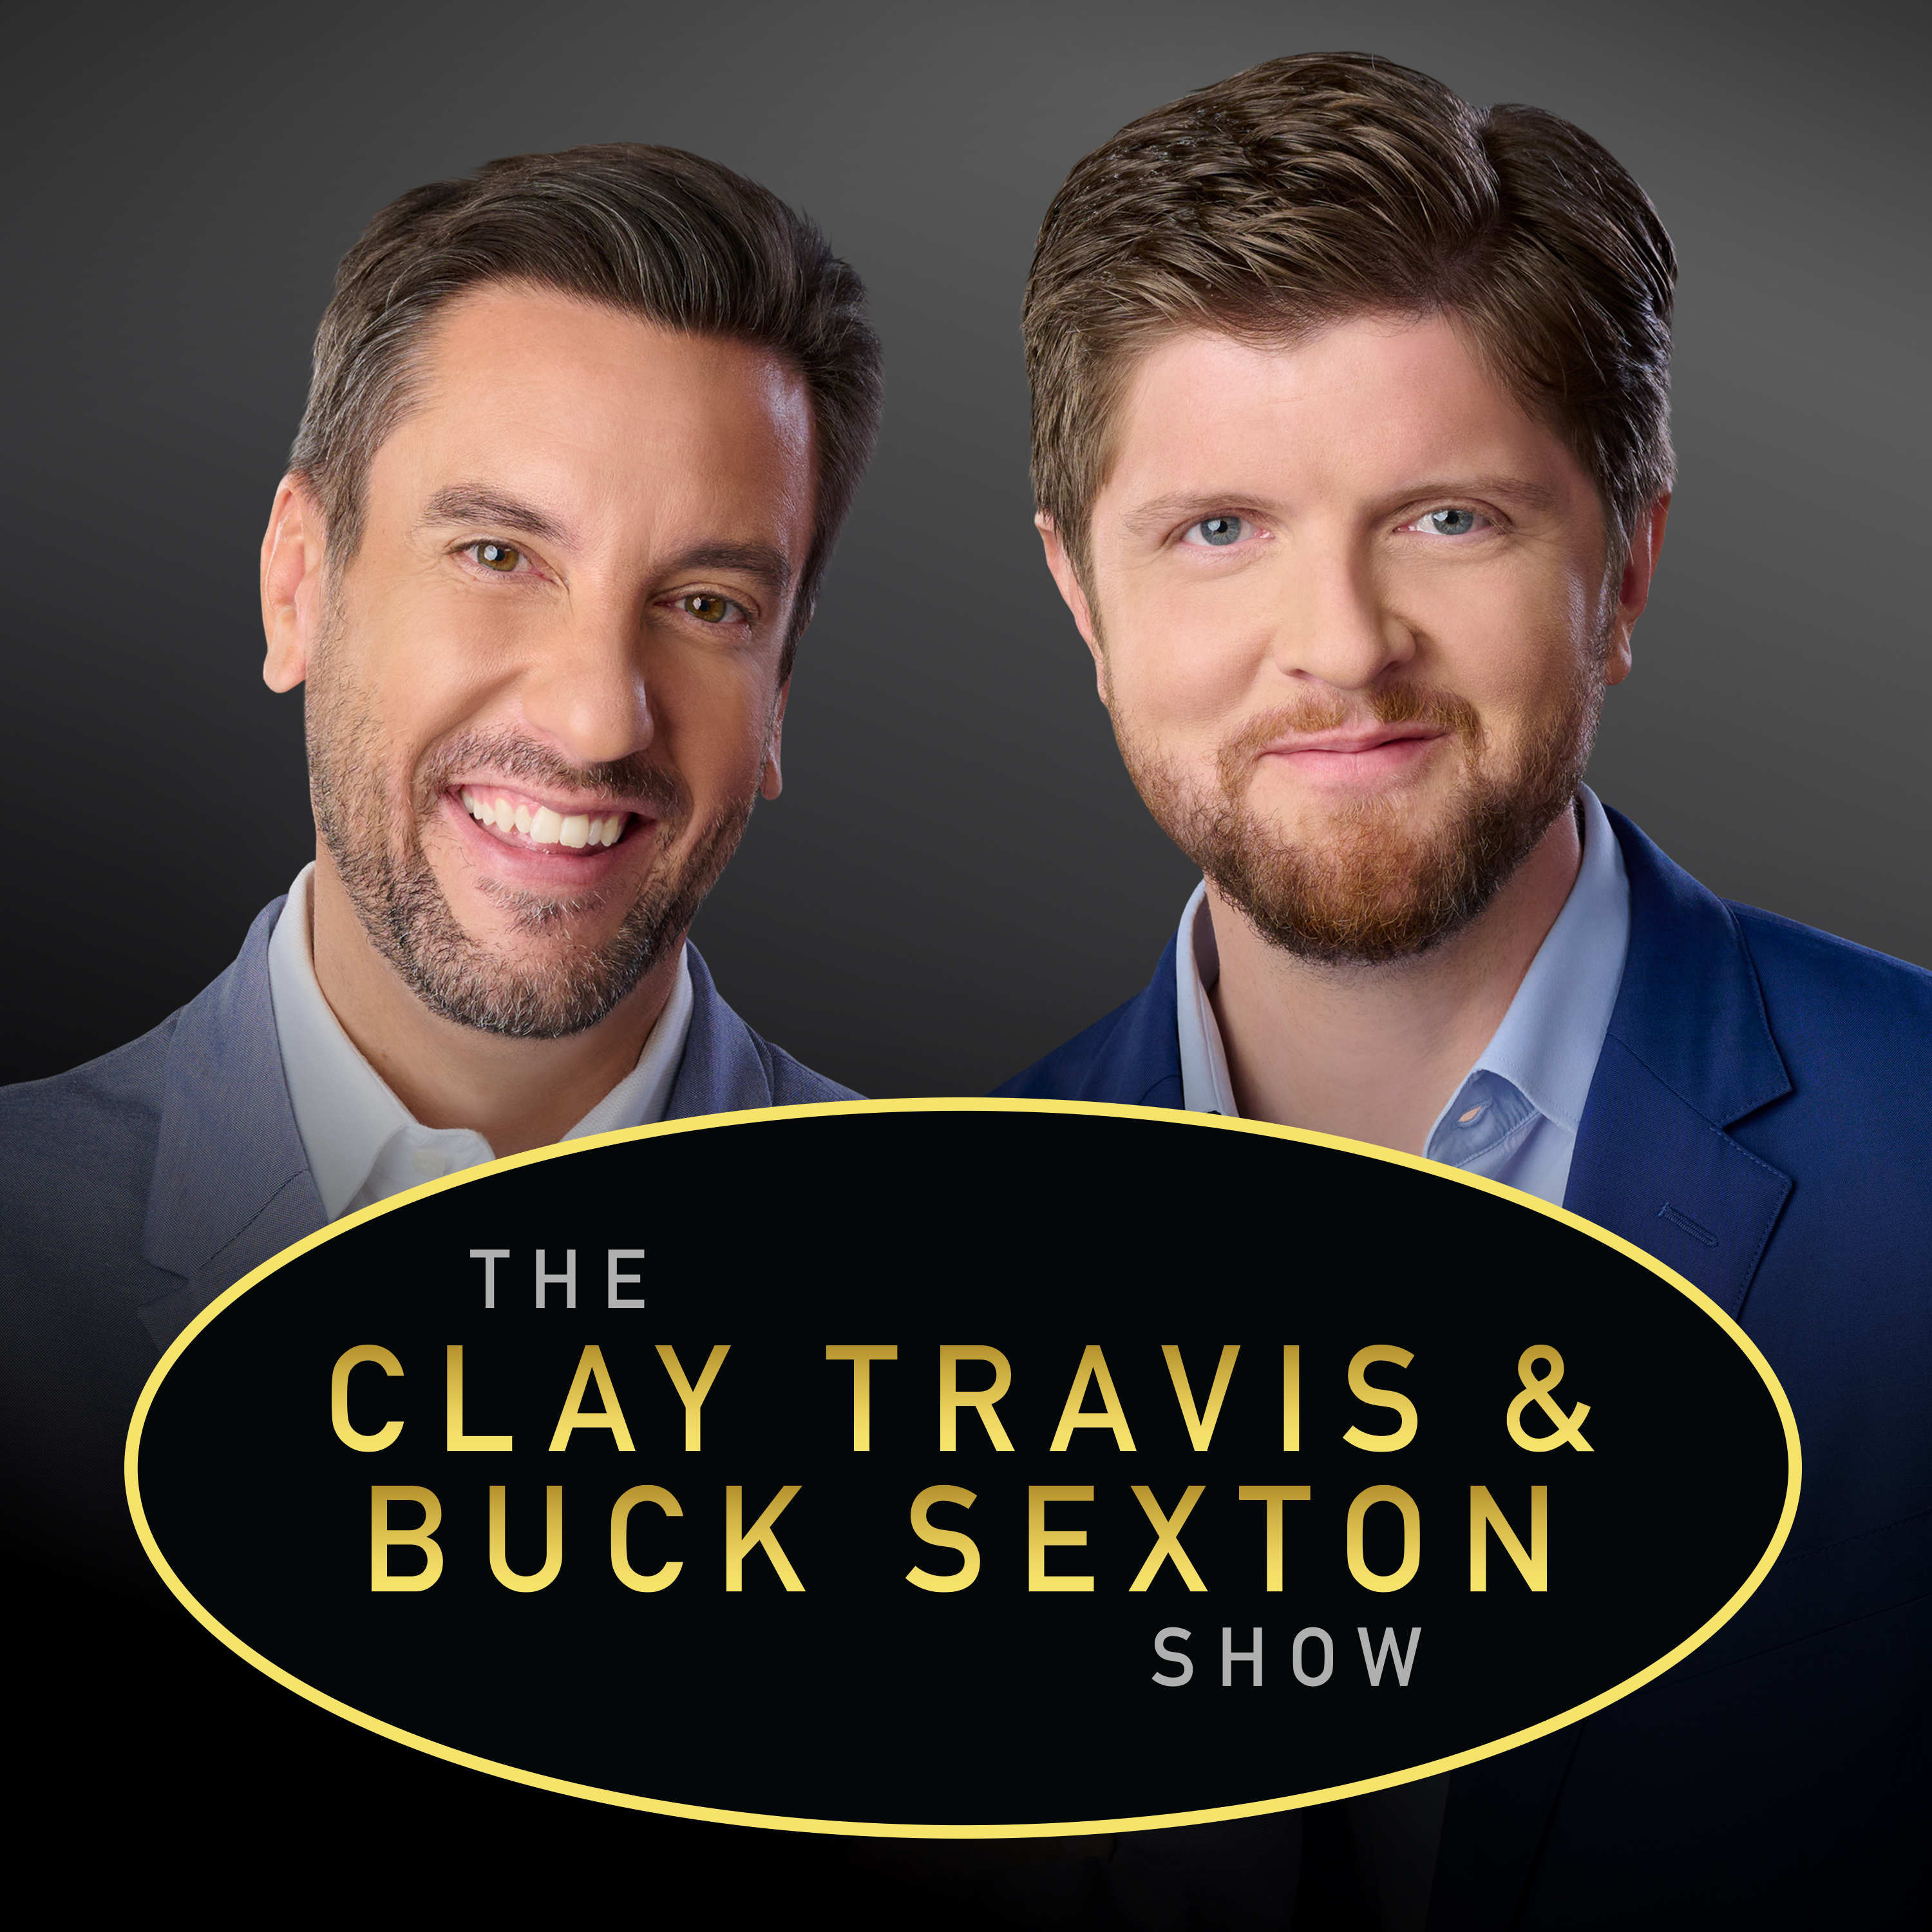 Clay Travis and Buck Sexton Show H1 – May 17 2022